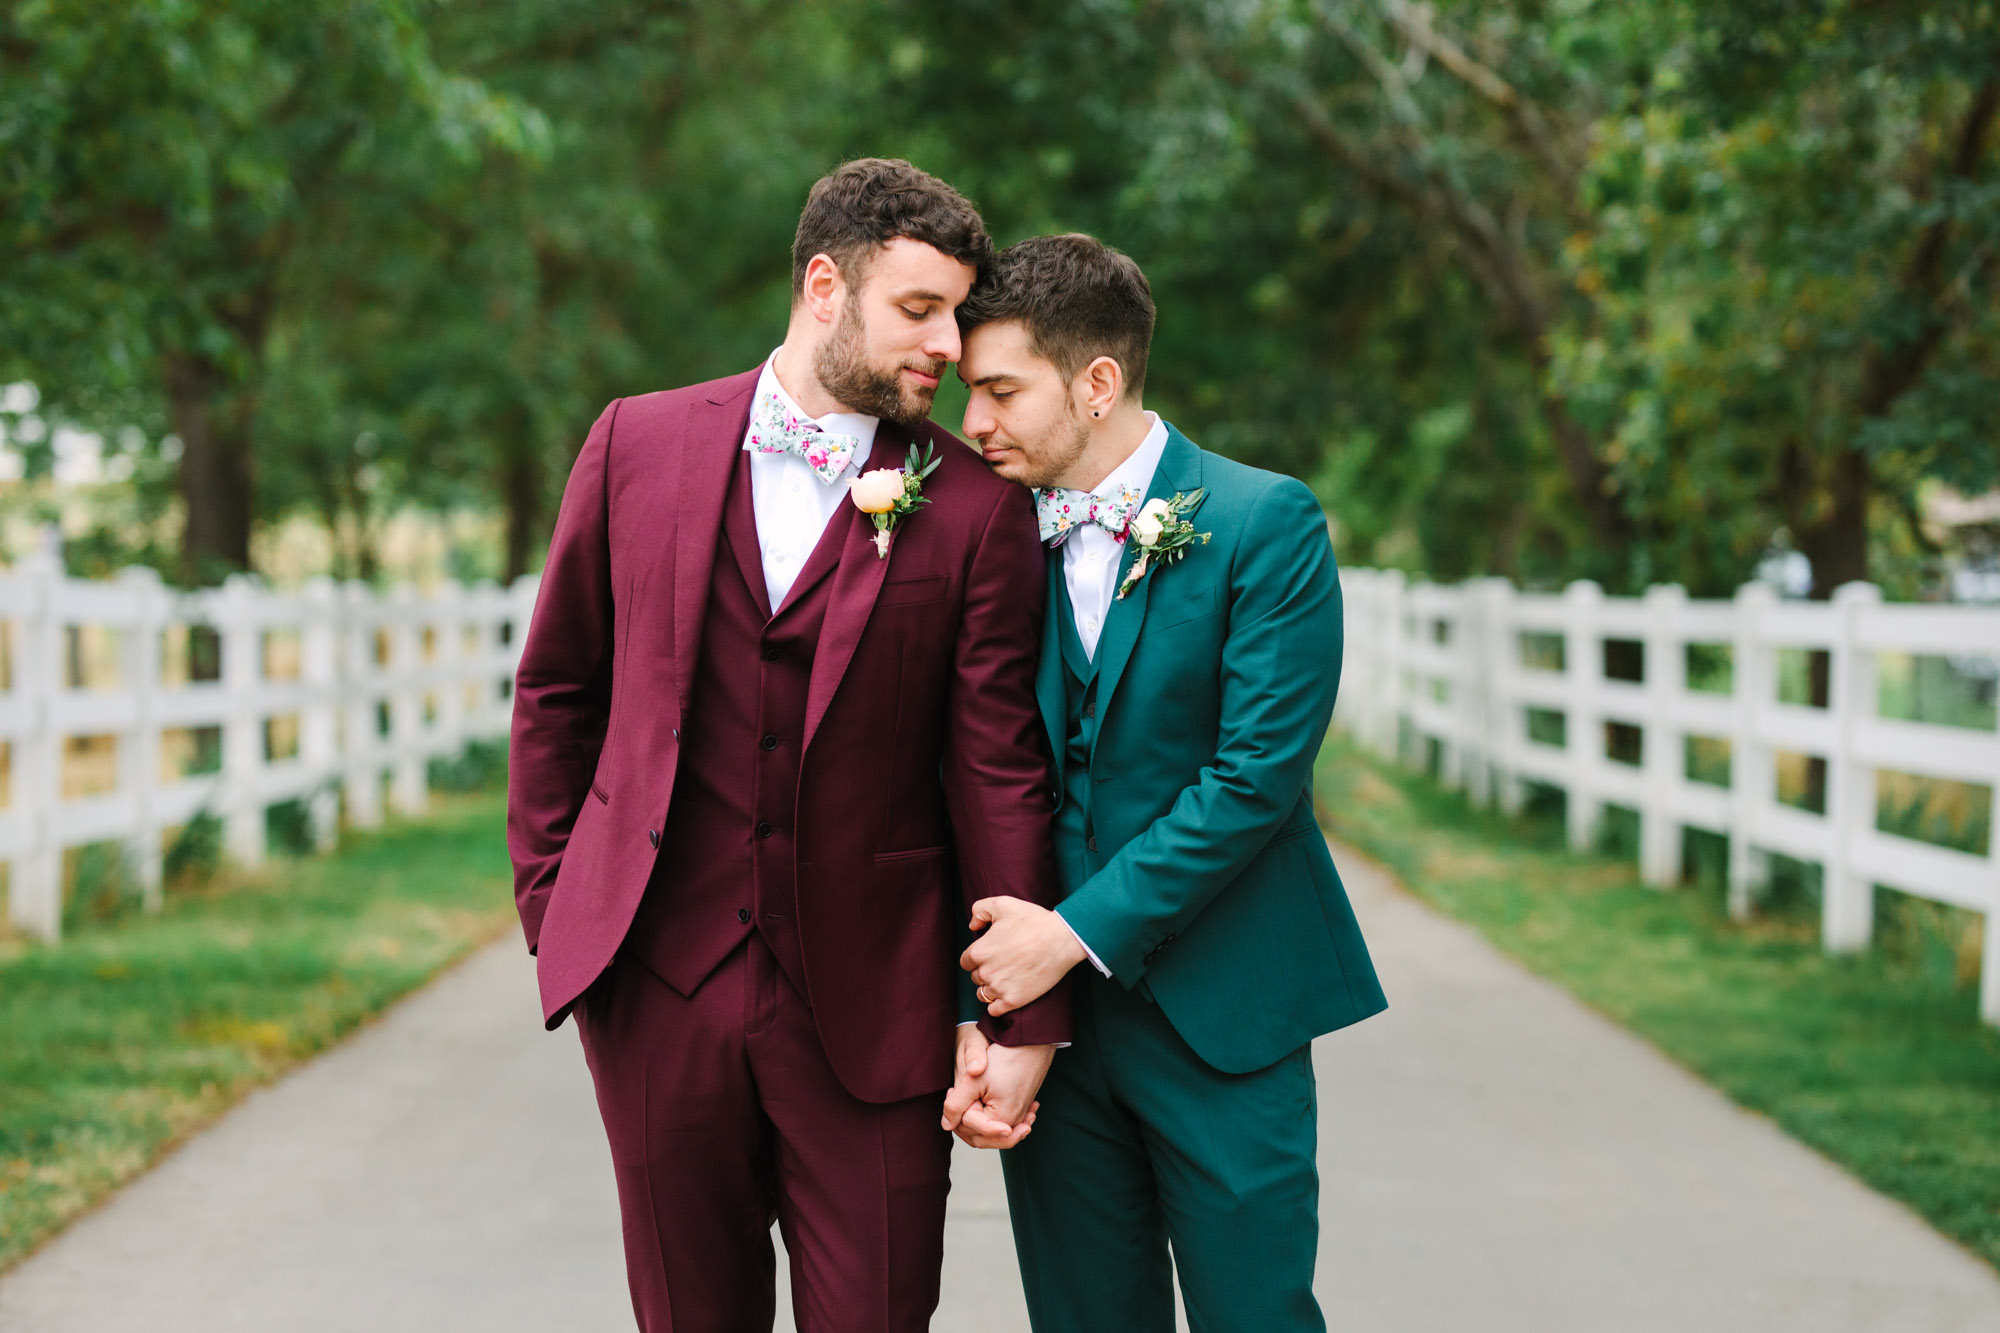 Two grooms wedding portrait by Mary Costa Photography